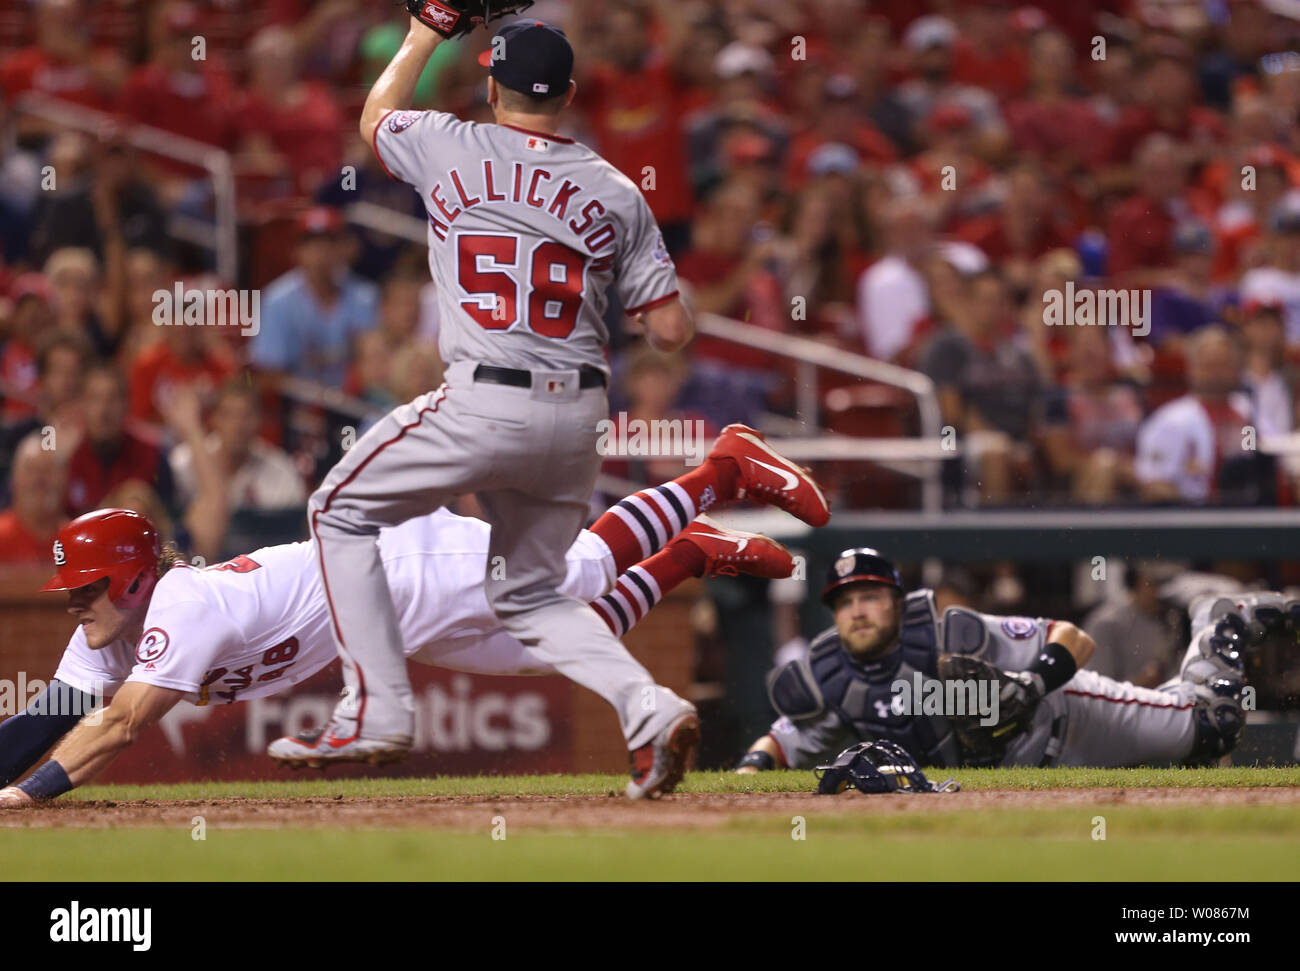 Washington Nationals starting pitcher Jeremy Hellickson can only watch as St. Louis Cardinals Harrison Bader dives safely into home plate after a pass ball in the fifth inning at Busch Stadium in St. Louis on August 15, 2018. Looking on is catcher Spencer Kieboom.  Photo by Bill Greenblatt/UPI Stock Photo